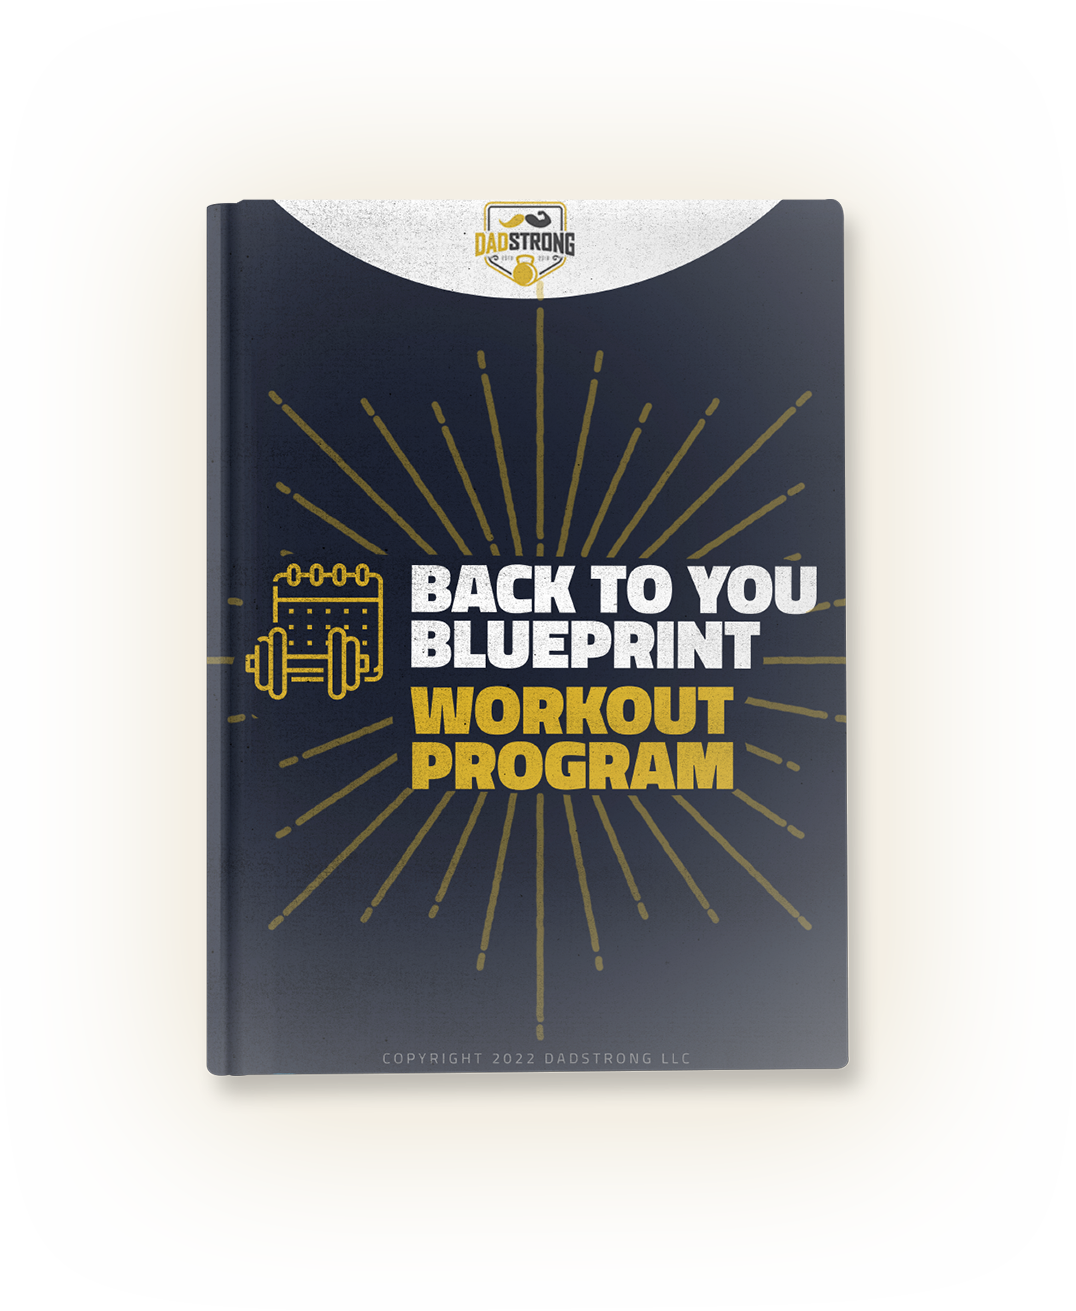 Back To You Blueprint Launches Workout Program For Dads